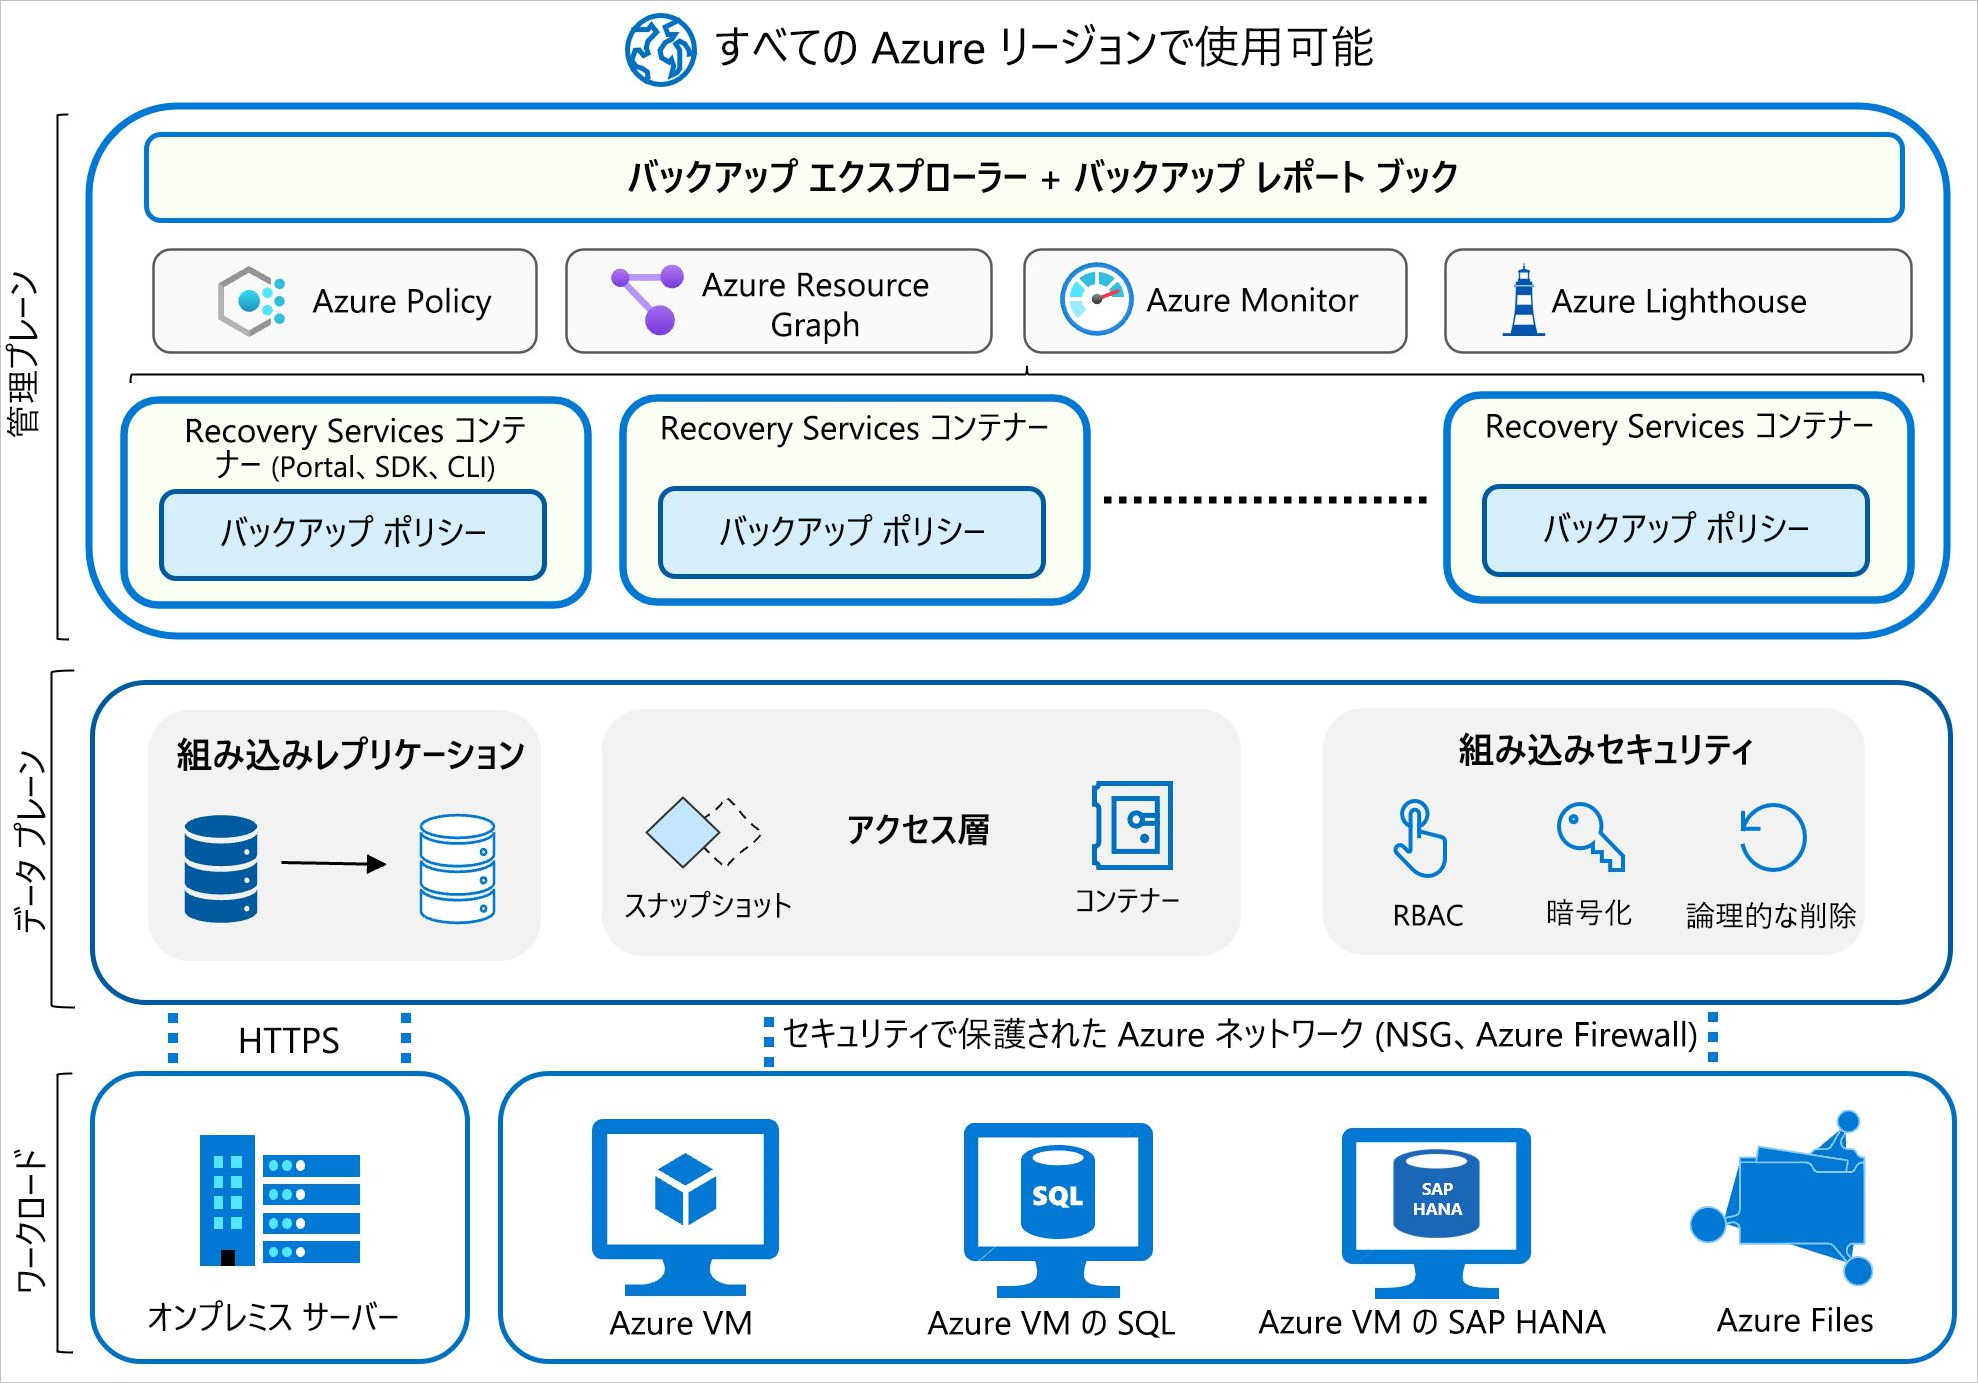 Diagram of Azure Backup architecture displaying workloads at the bottom, feeding into the data plane above that, tying into the management plane with backup policies, Azure policies, Azure Monitor, and Azure Lighthouse services listed for management.